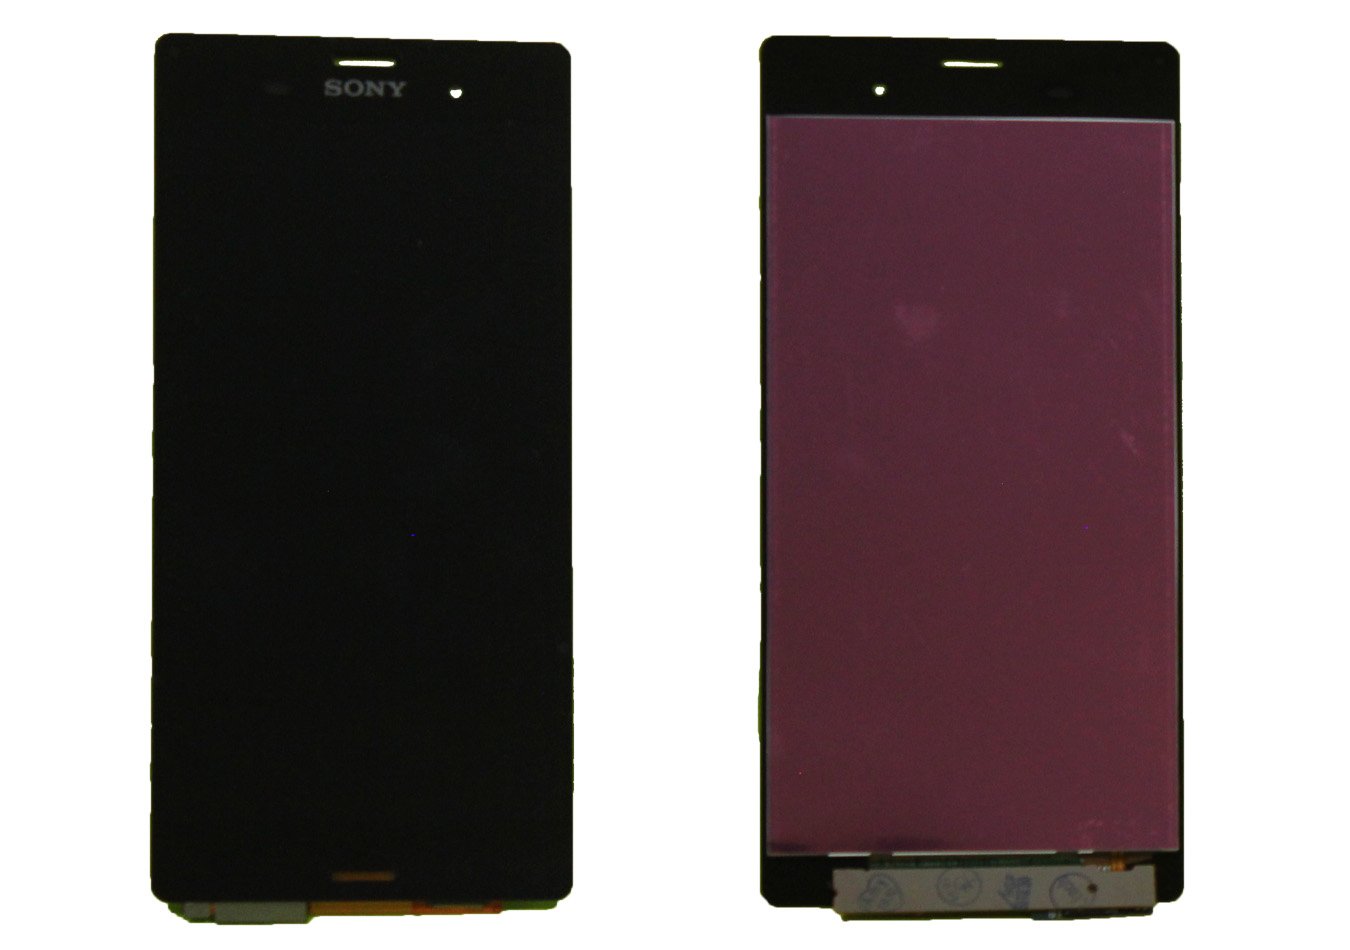 SXZ Xperia Z3 Screen Assembly (Without The Frame) (Refurbished) (Black)